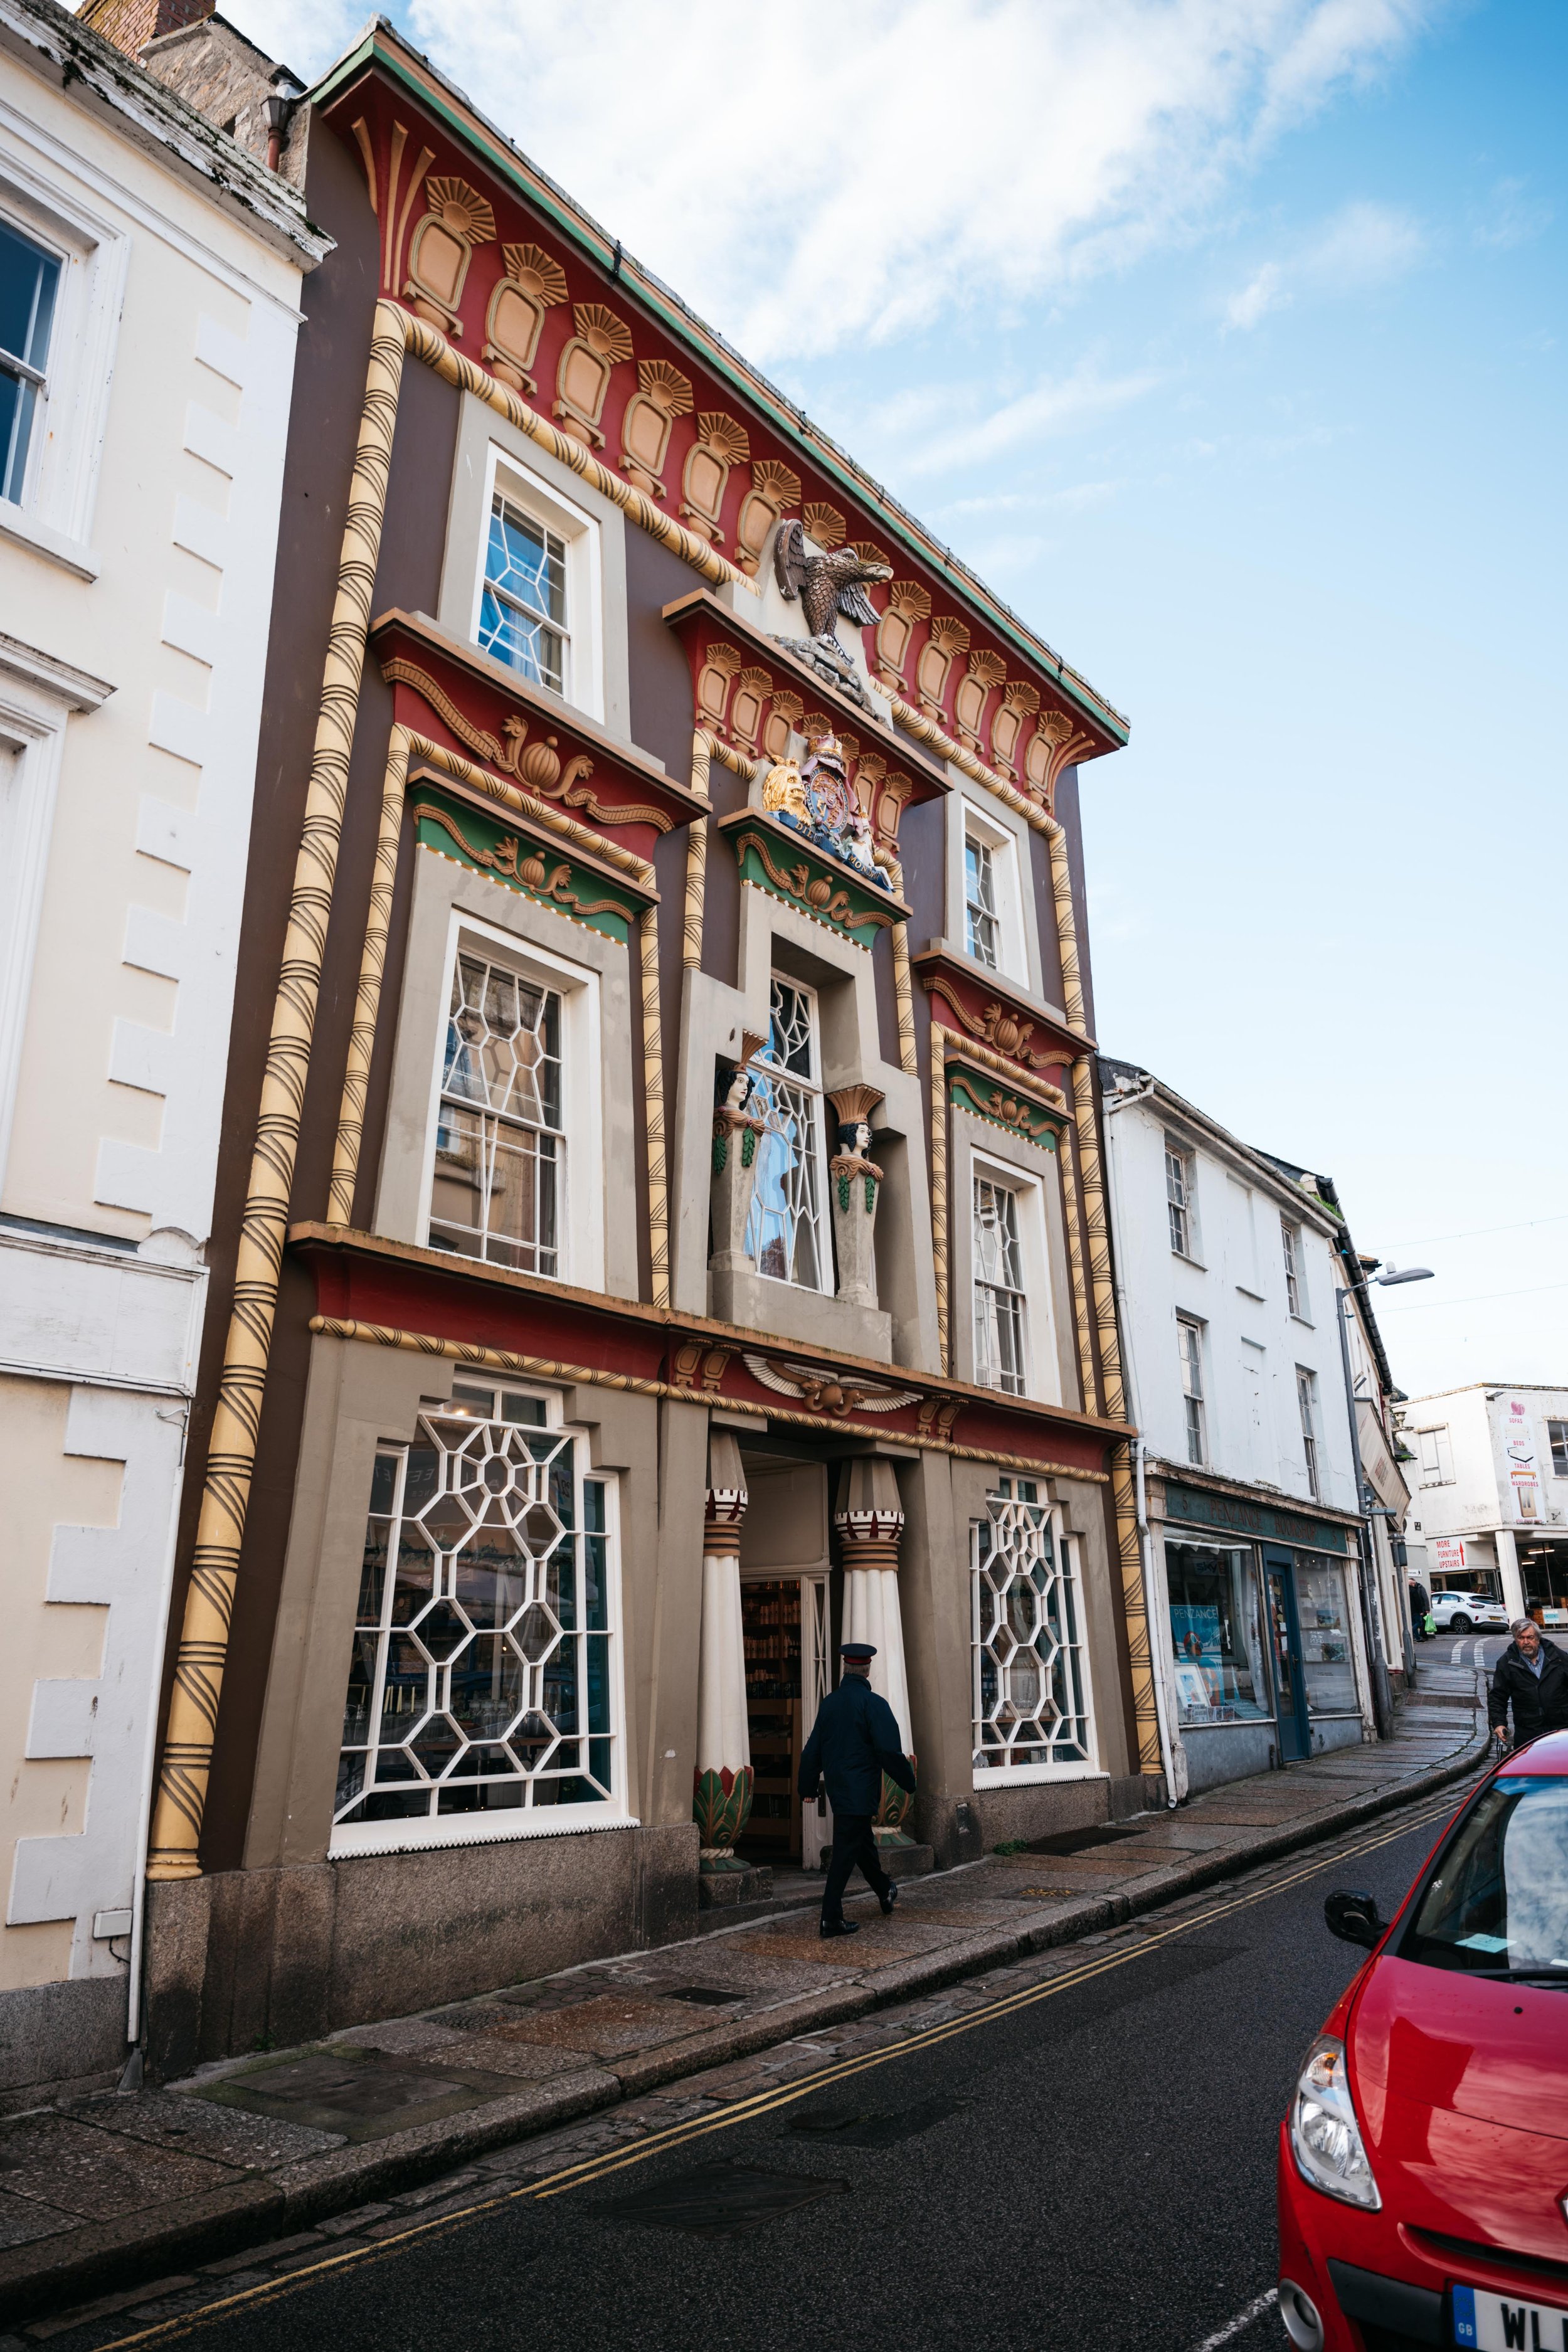  This unusual shop dates back to the 19th century and is dressed up in ancient Egyptian style 